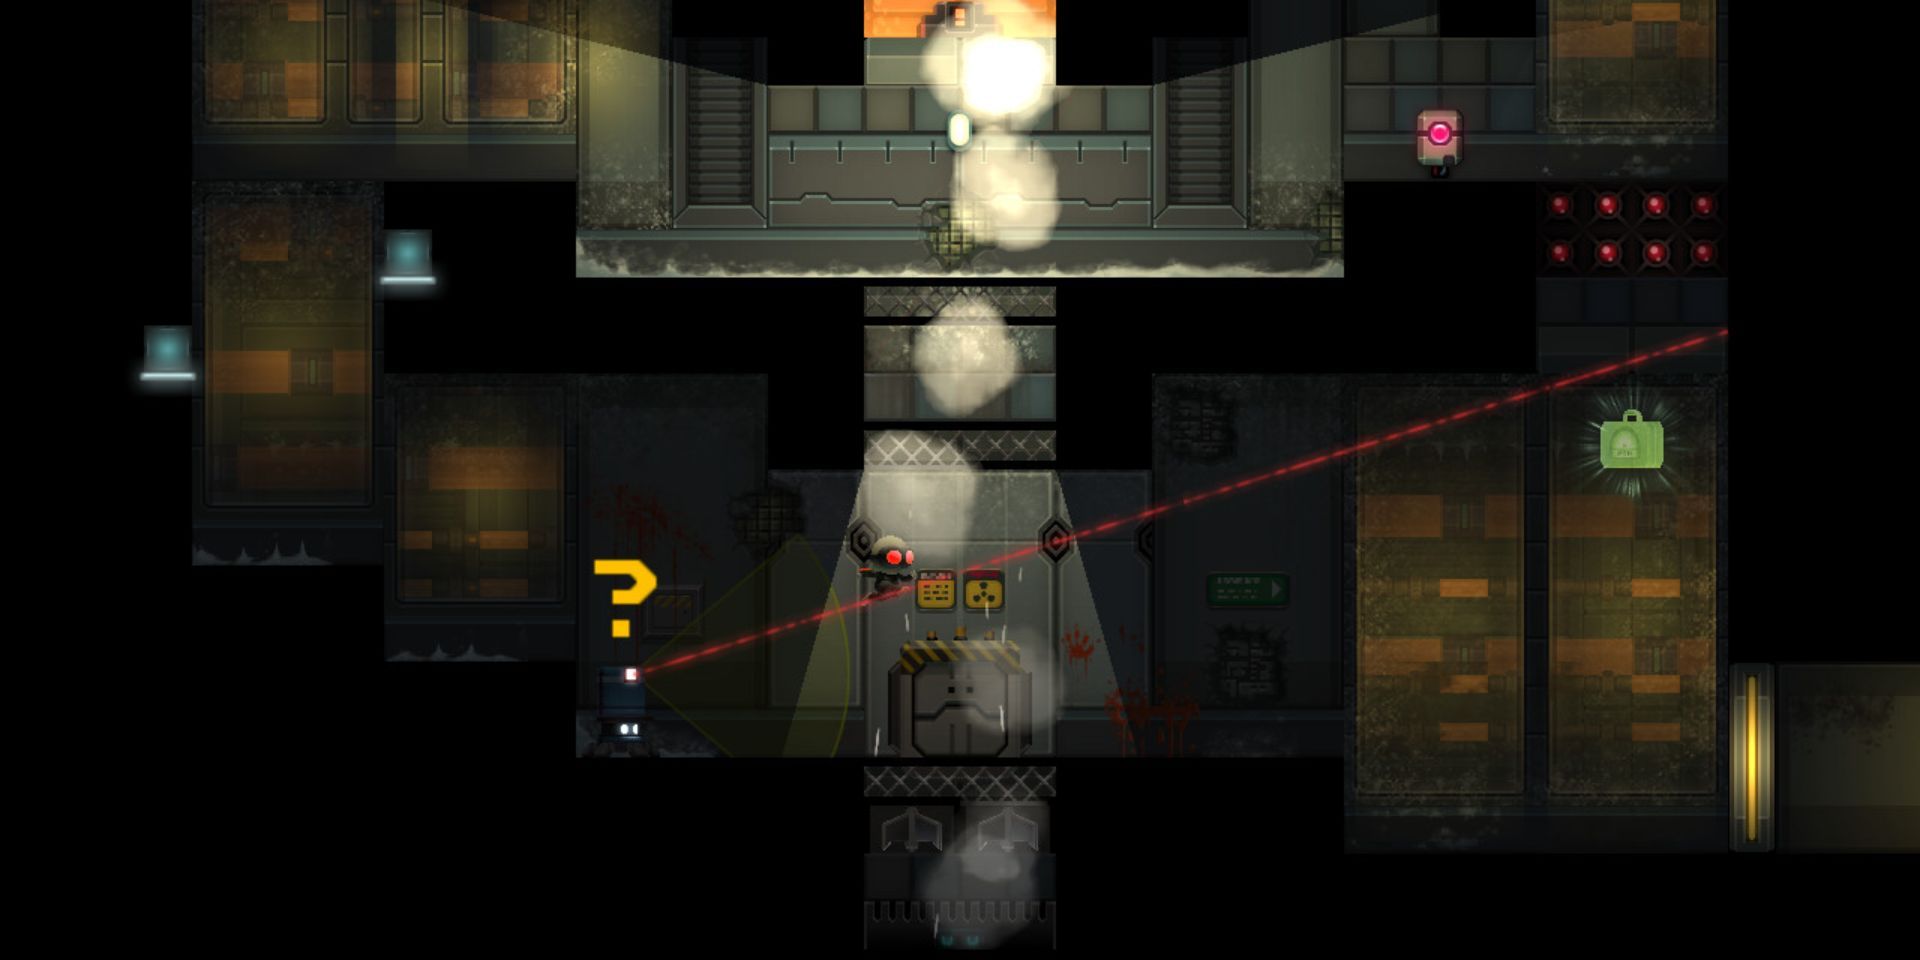 Avoiding a turret in Stealth Inc 2 A Game of Clones